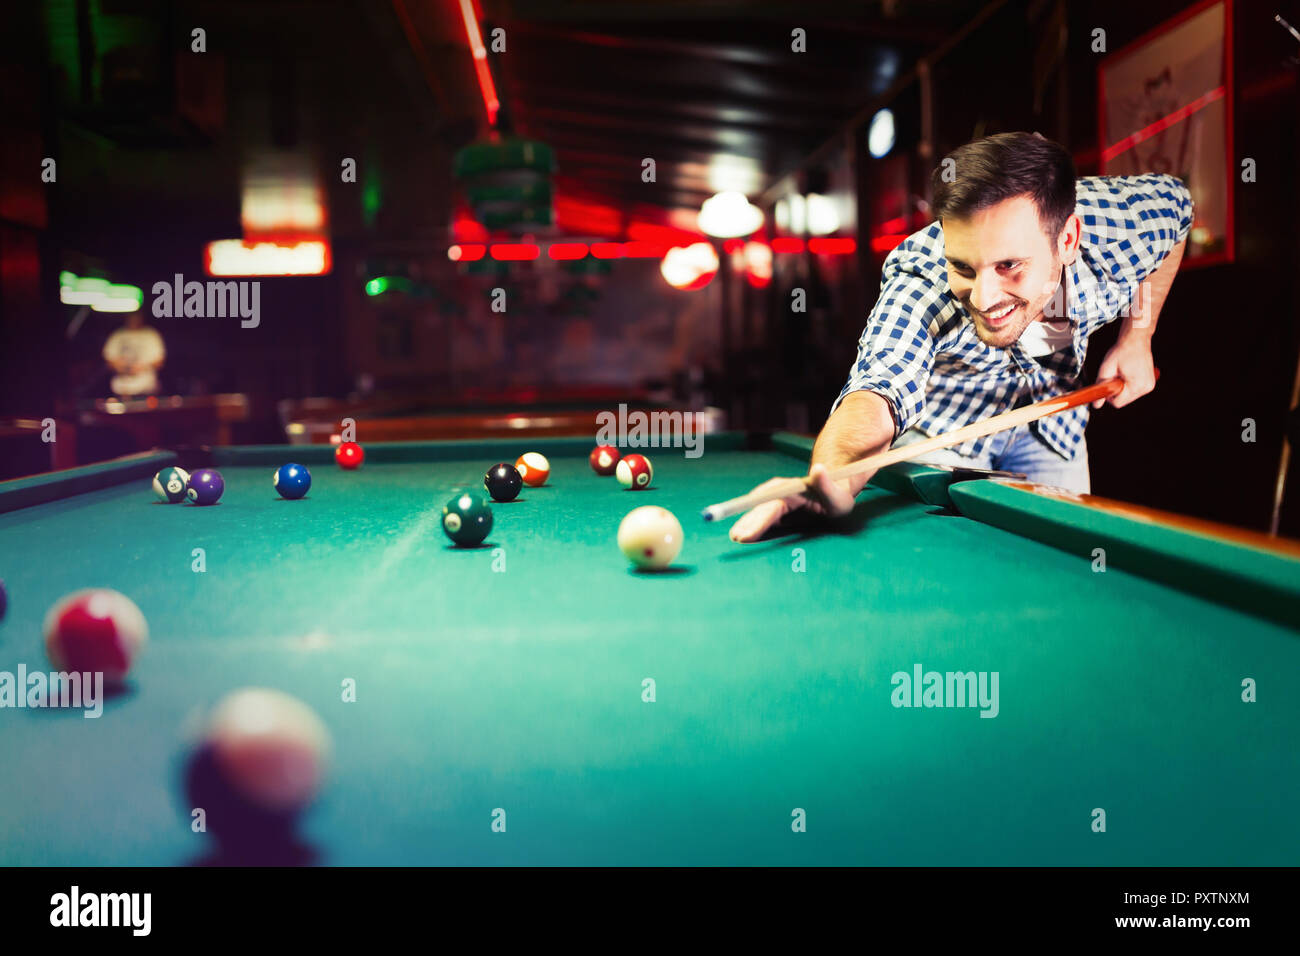 Hansome man playing pool in bar alone Stock Photo